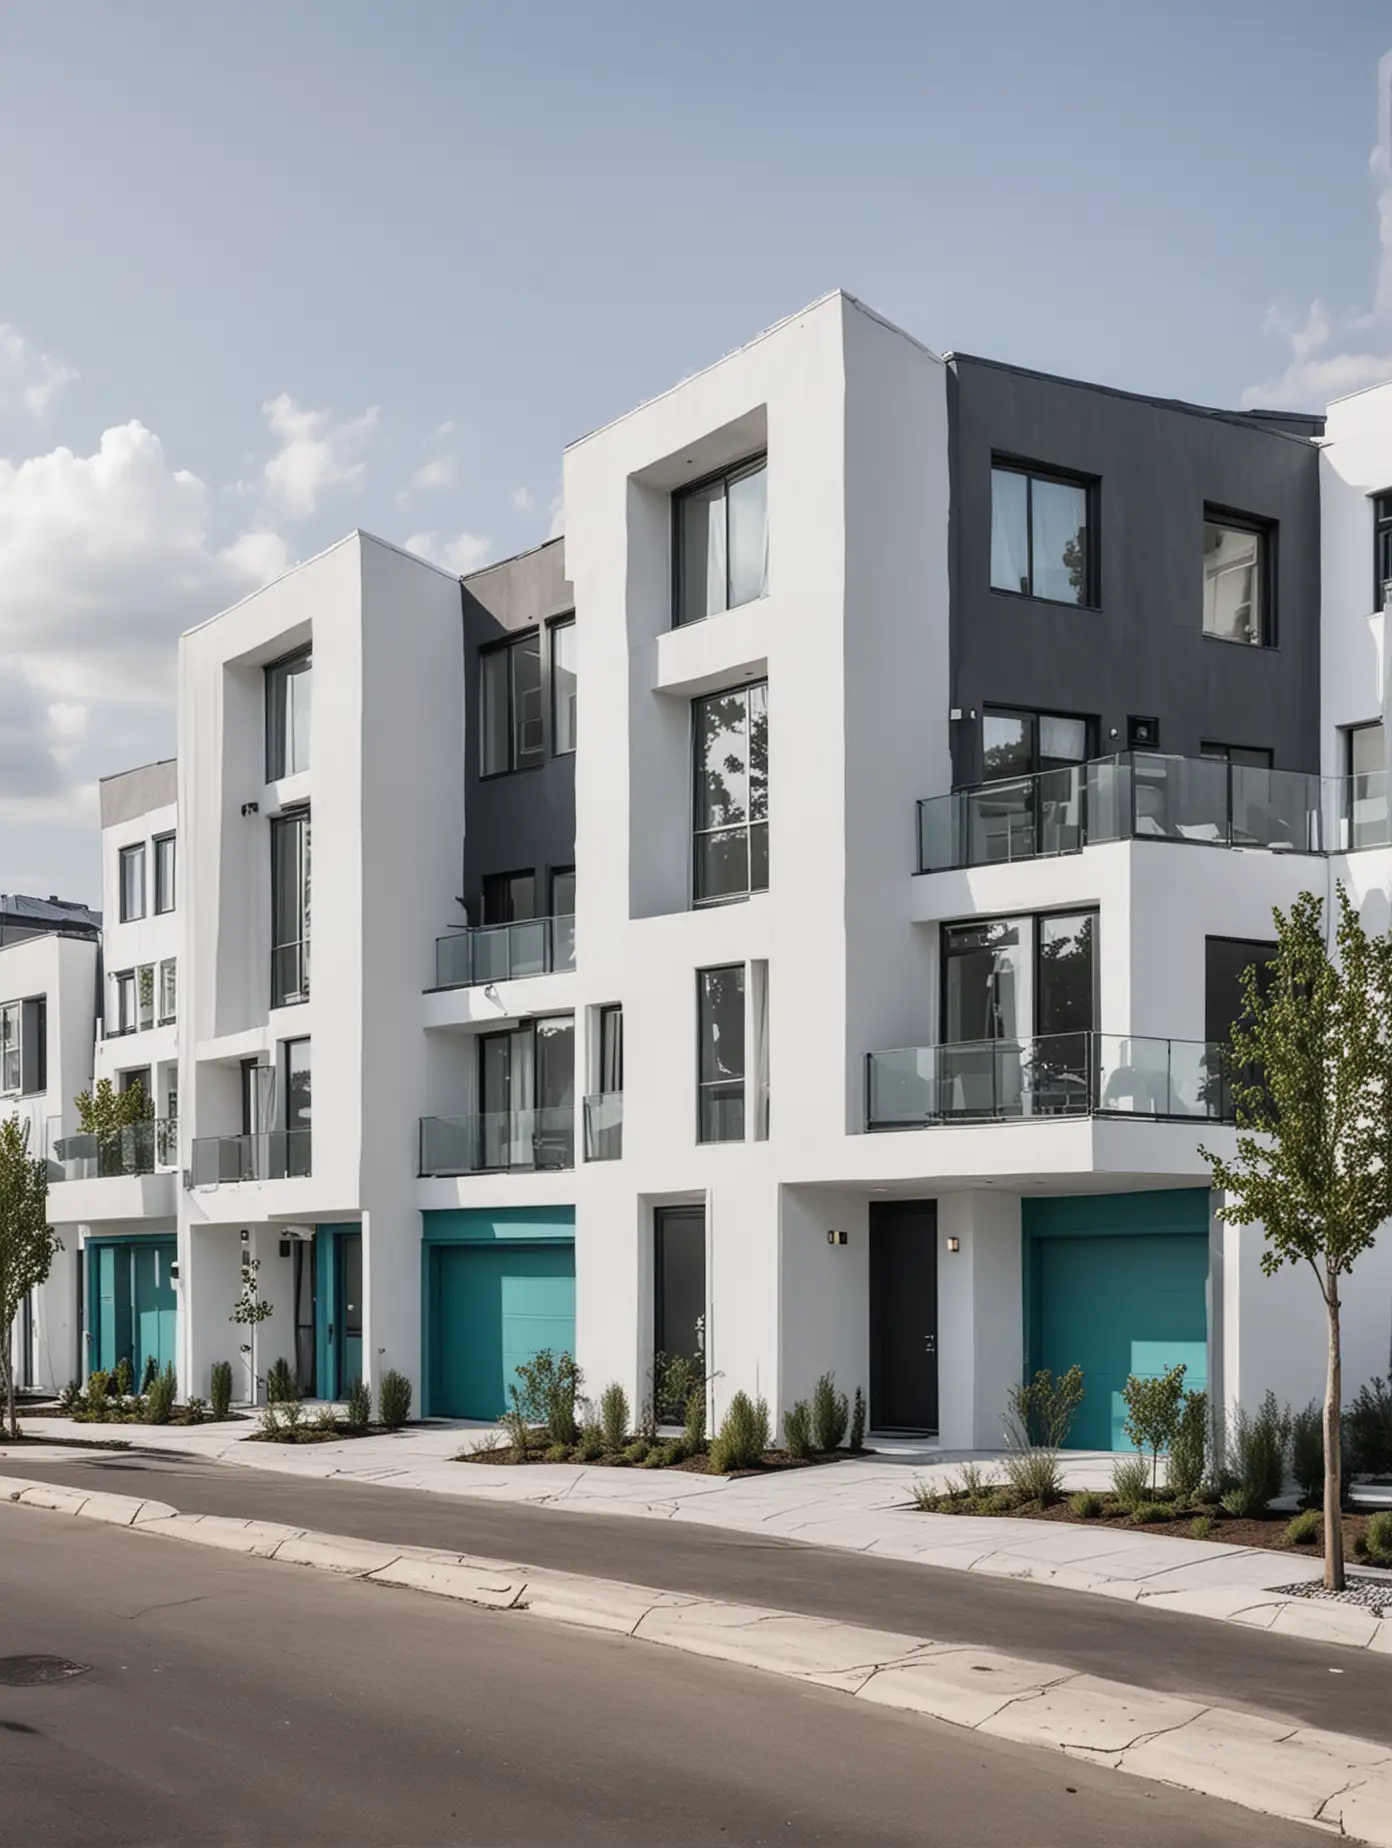 Luxury Modern EcoFriendly Townhouses in White Gray and Teal